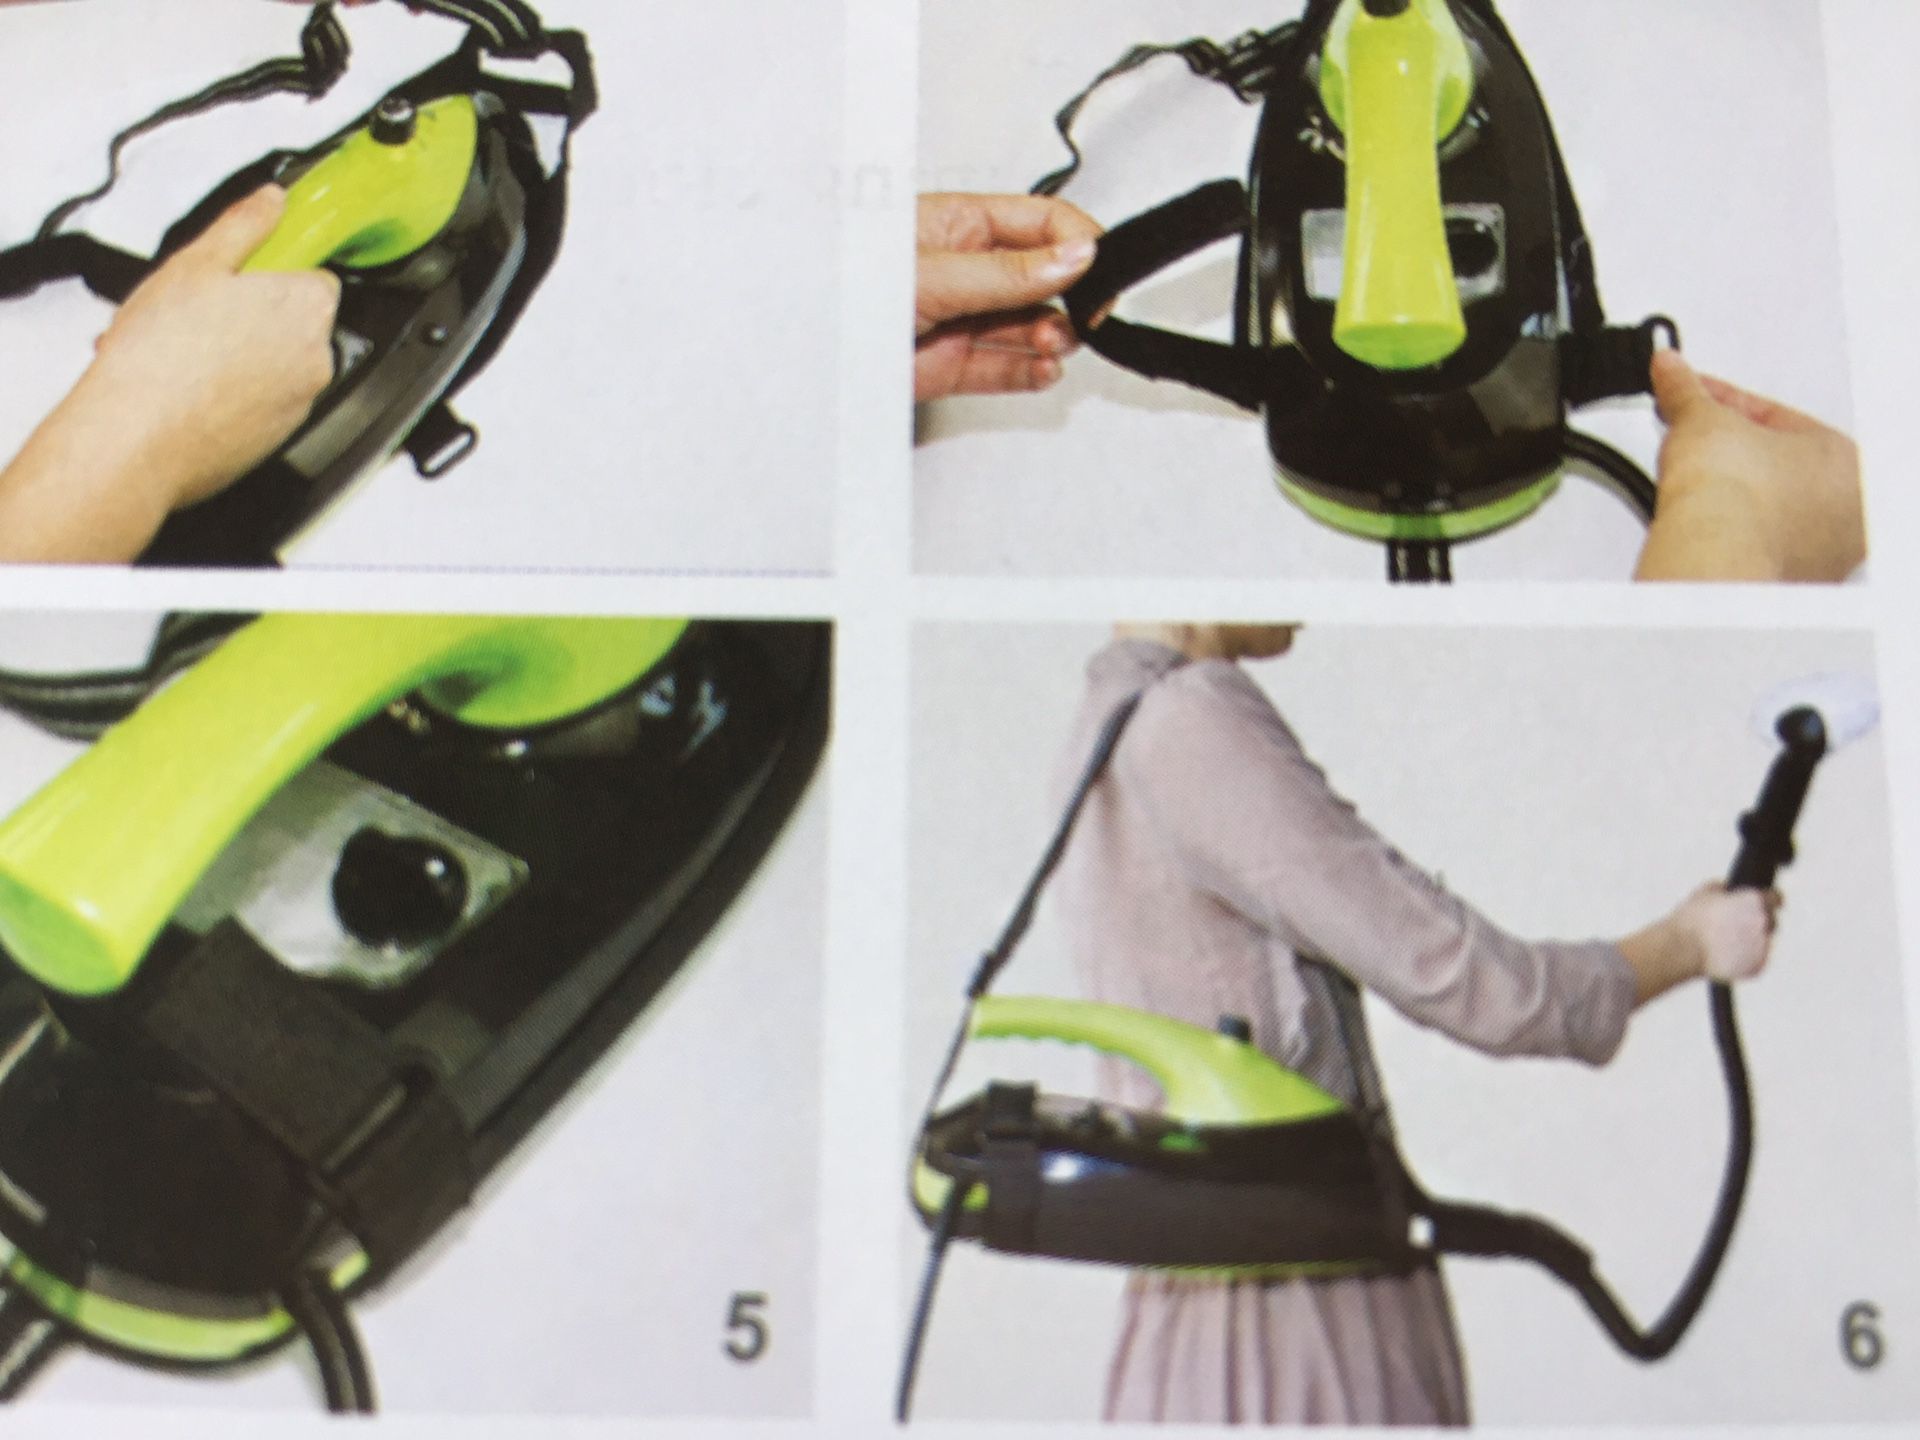 6-IN-1 Cleaner